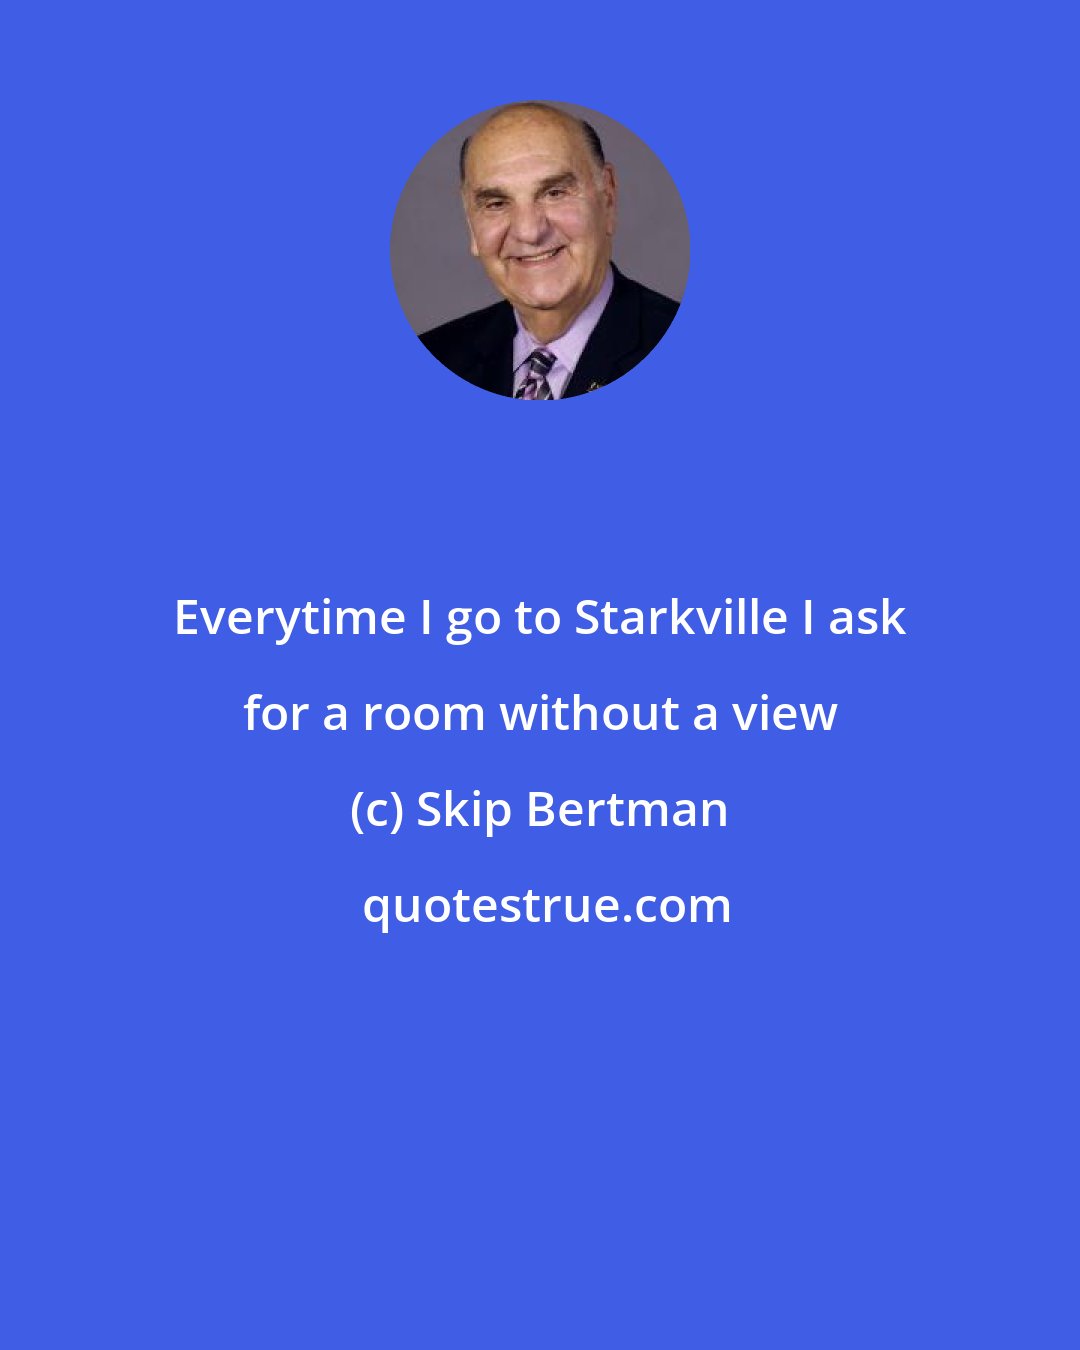 Skip Bertman: Everytime I go to Starkville I ask for a room without a view